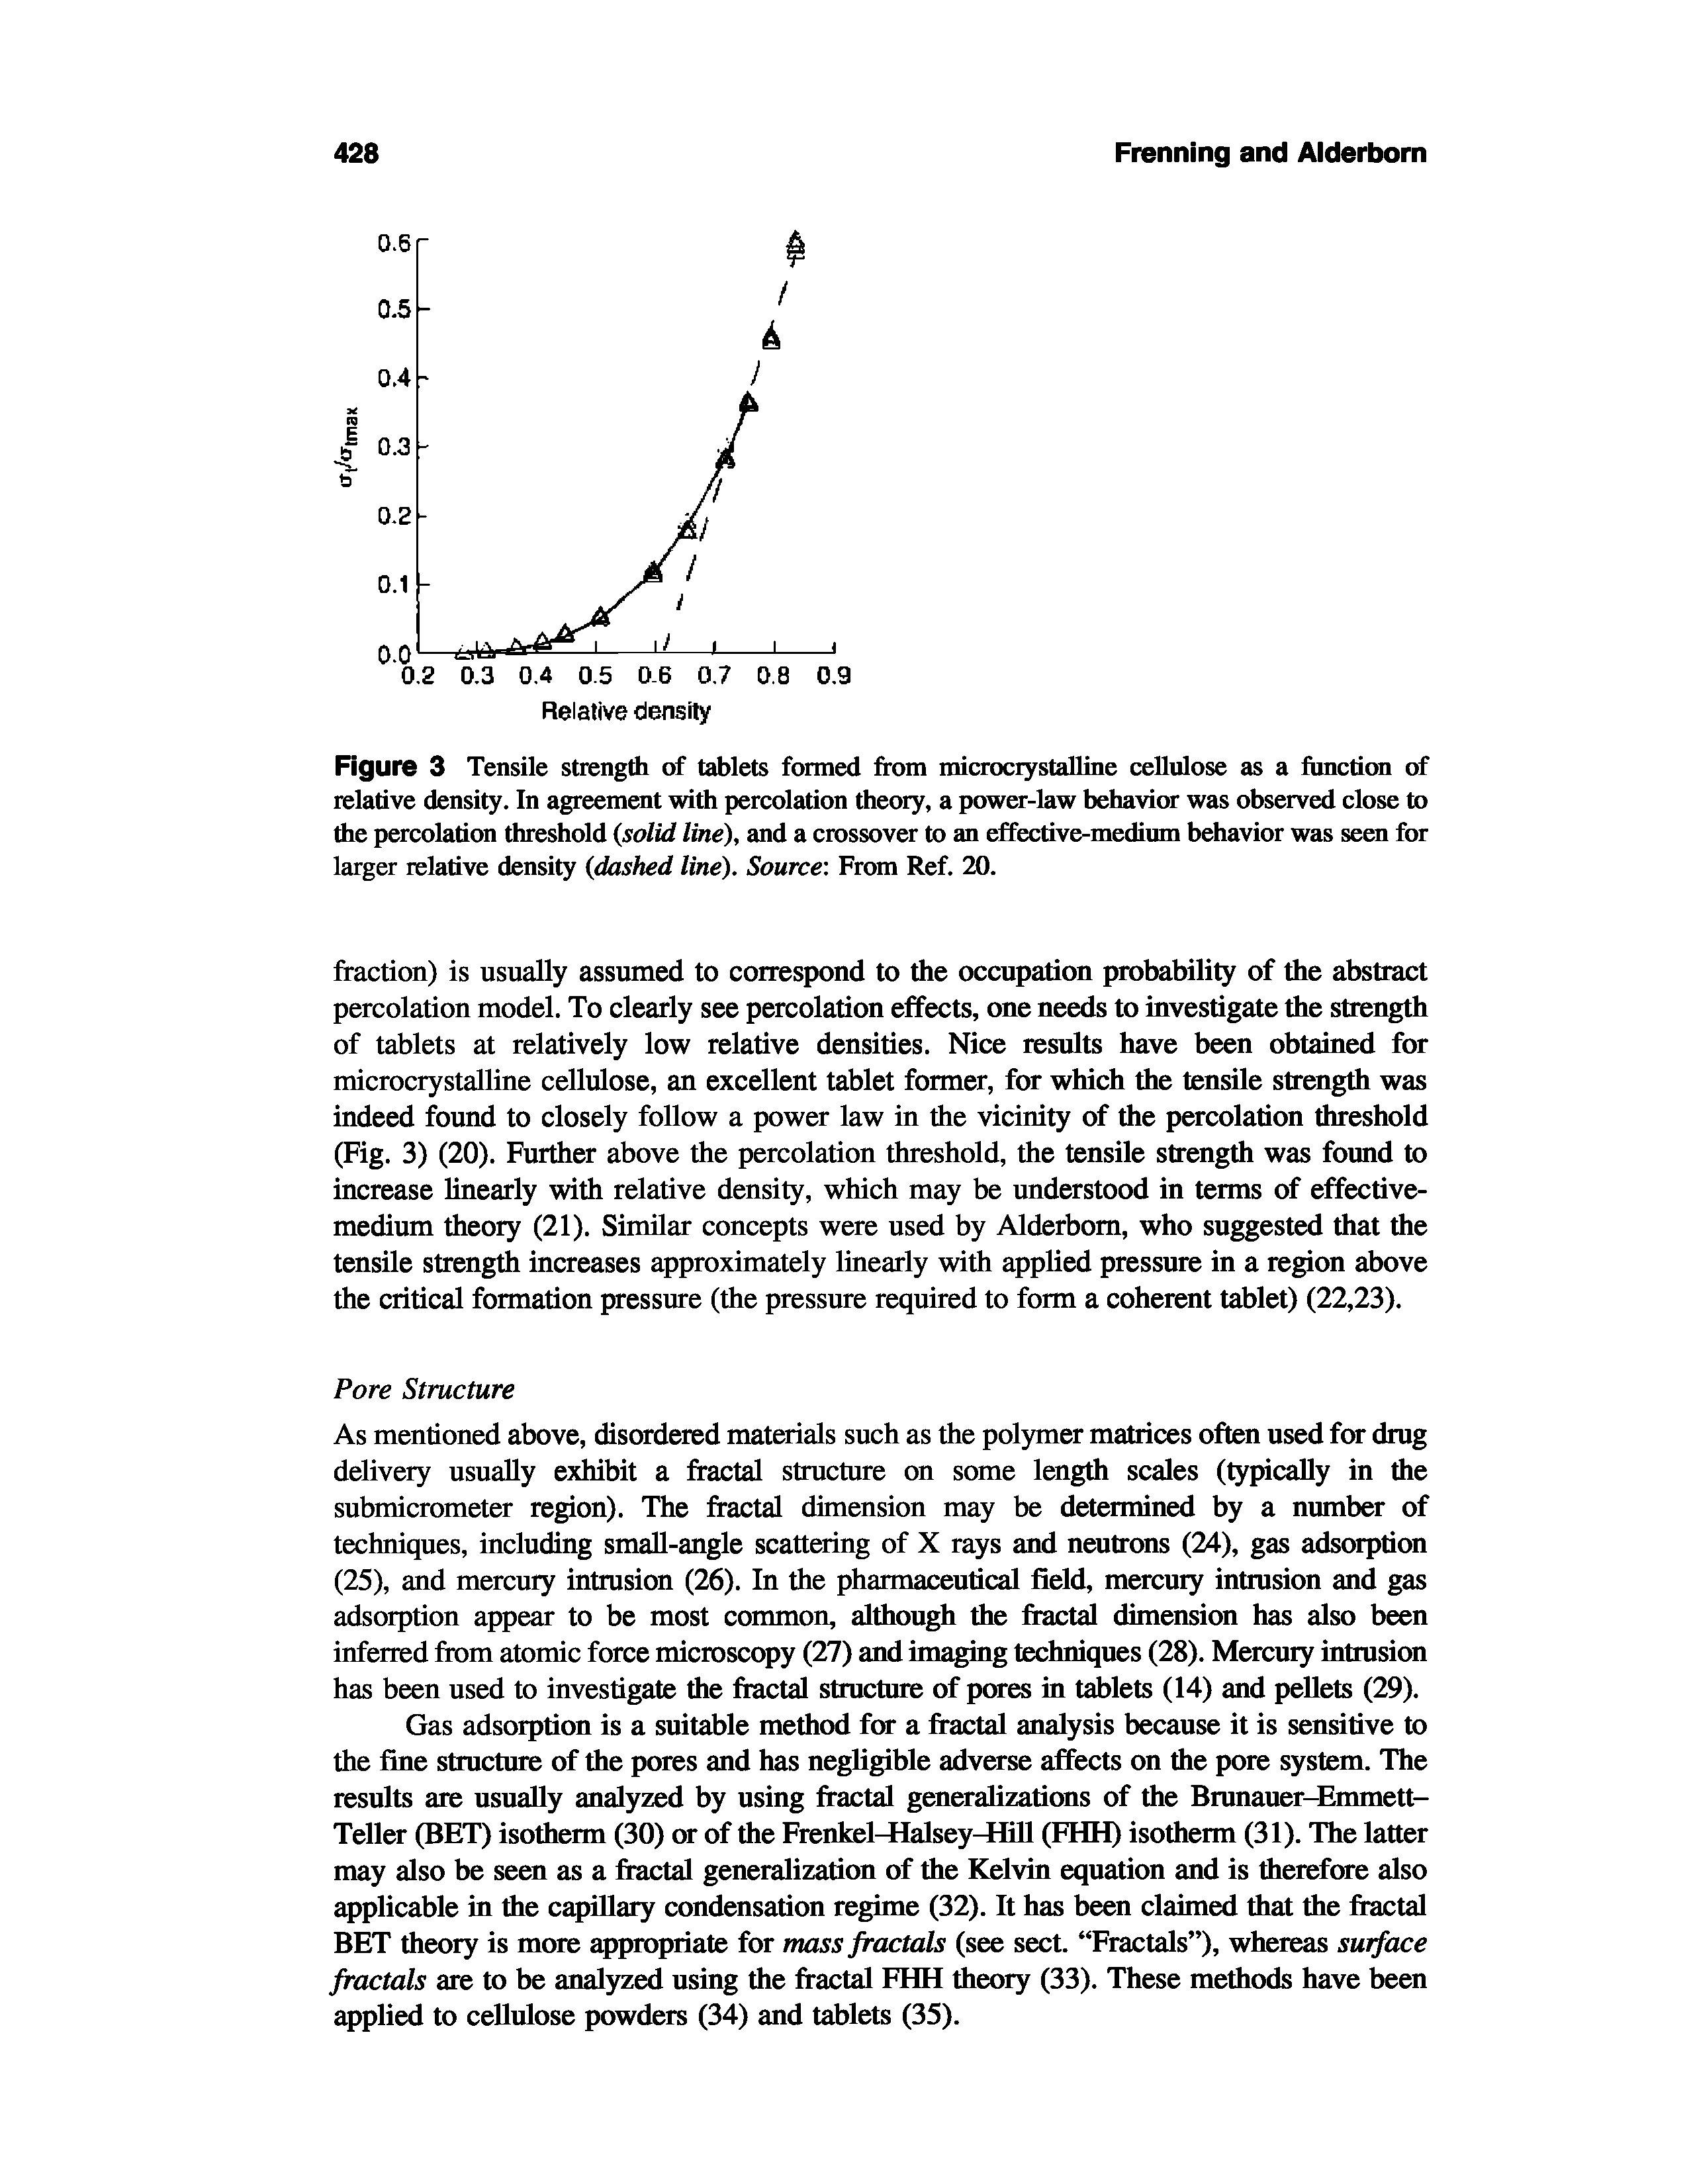 Figure 3 Tensile strength of tablets formed from microcrystalline cellulose as a function of relative density. In agreement with percolation theory, a power-law behavior was observed close to the percolation threshold solid line), and a crossover to an effective-medium behavior was seen for larger relative density dashed line). Source From Ref. 20.